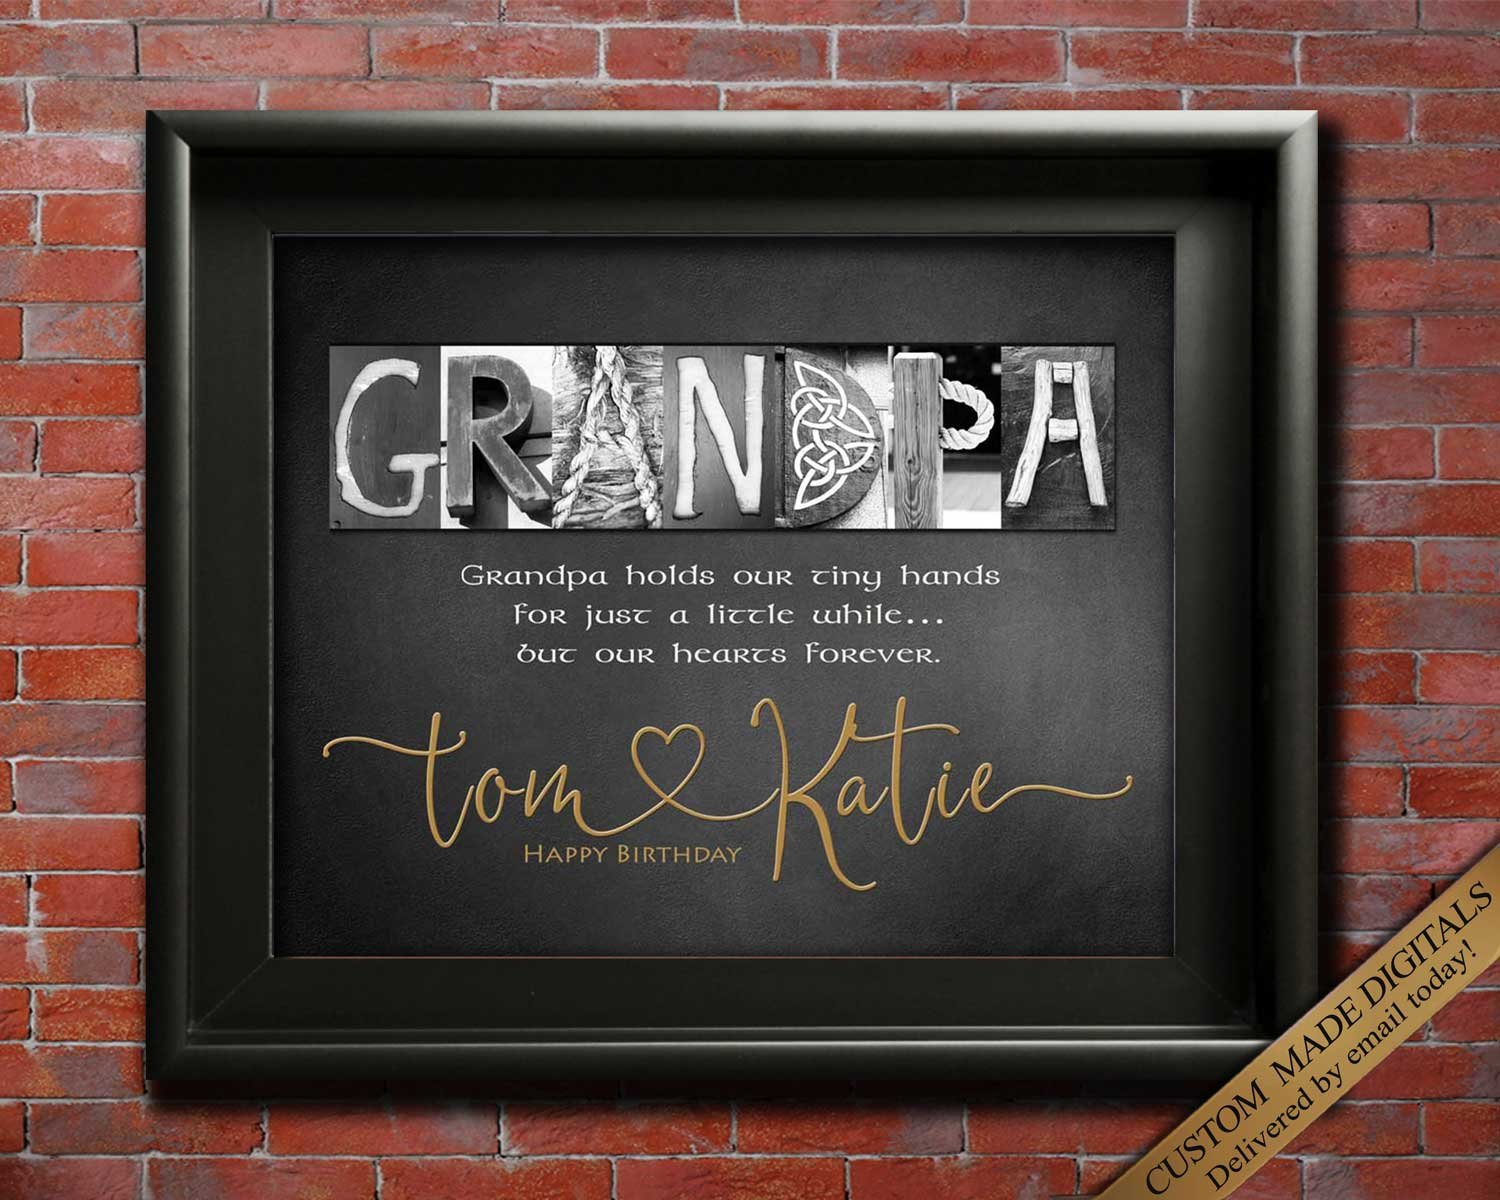 10 Practical & Meaningful Gift Ideas for Grandparents - Our Home On Purpose  | Grandparent gifts, Grandfather gifts, Meaningful christmas gifts